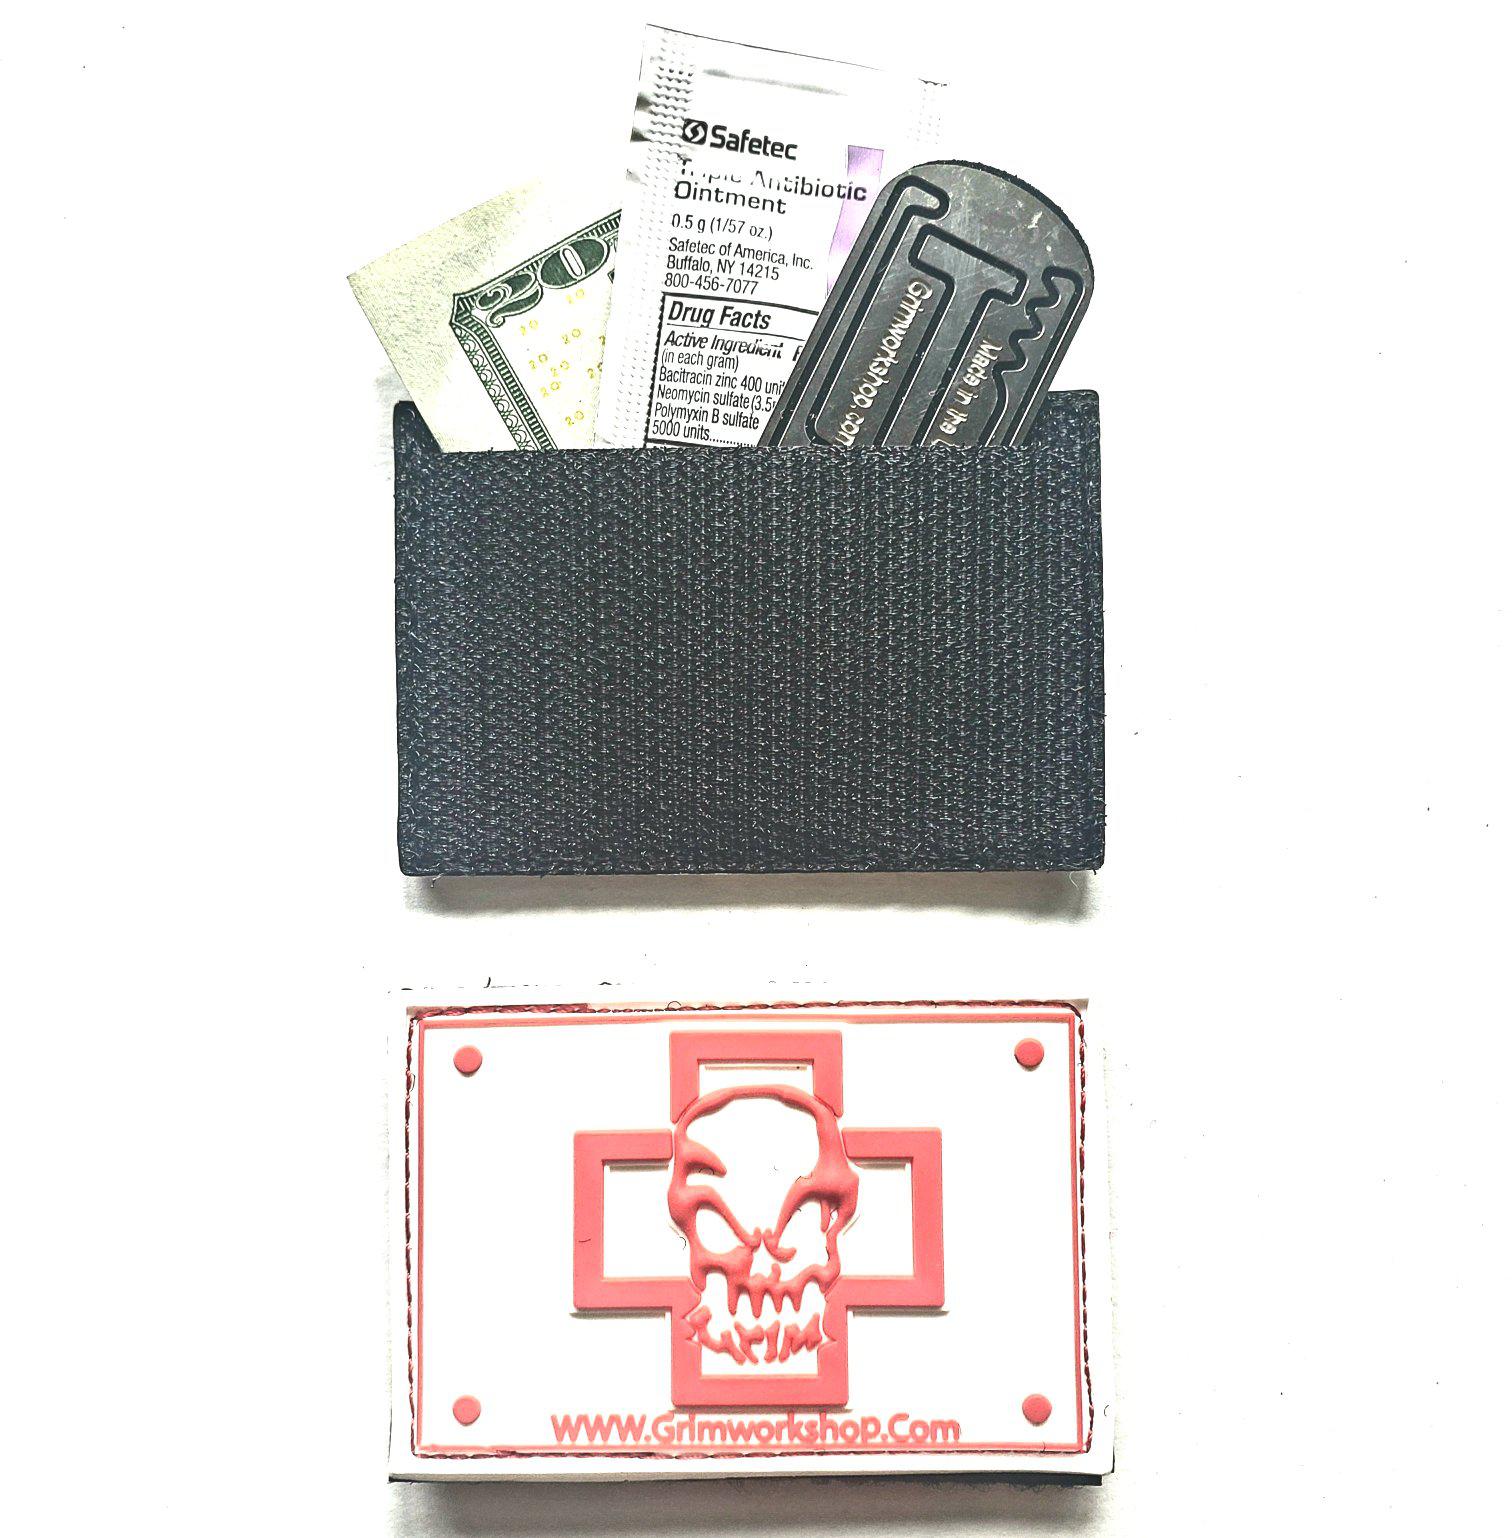 Wilderness First Aid Patch